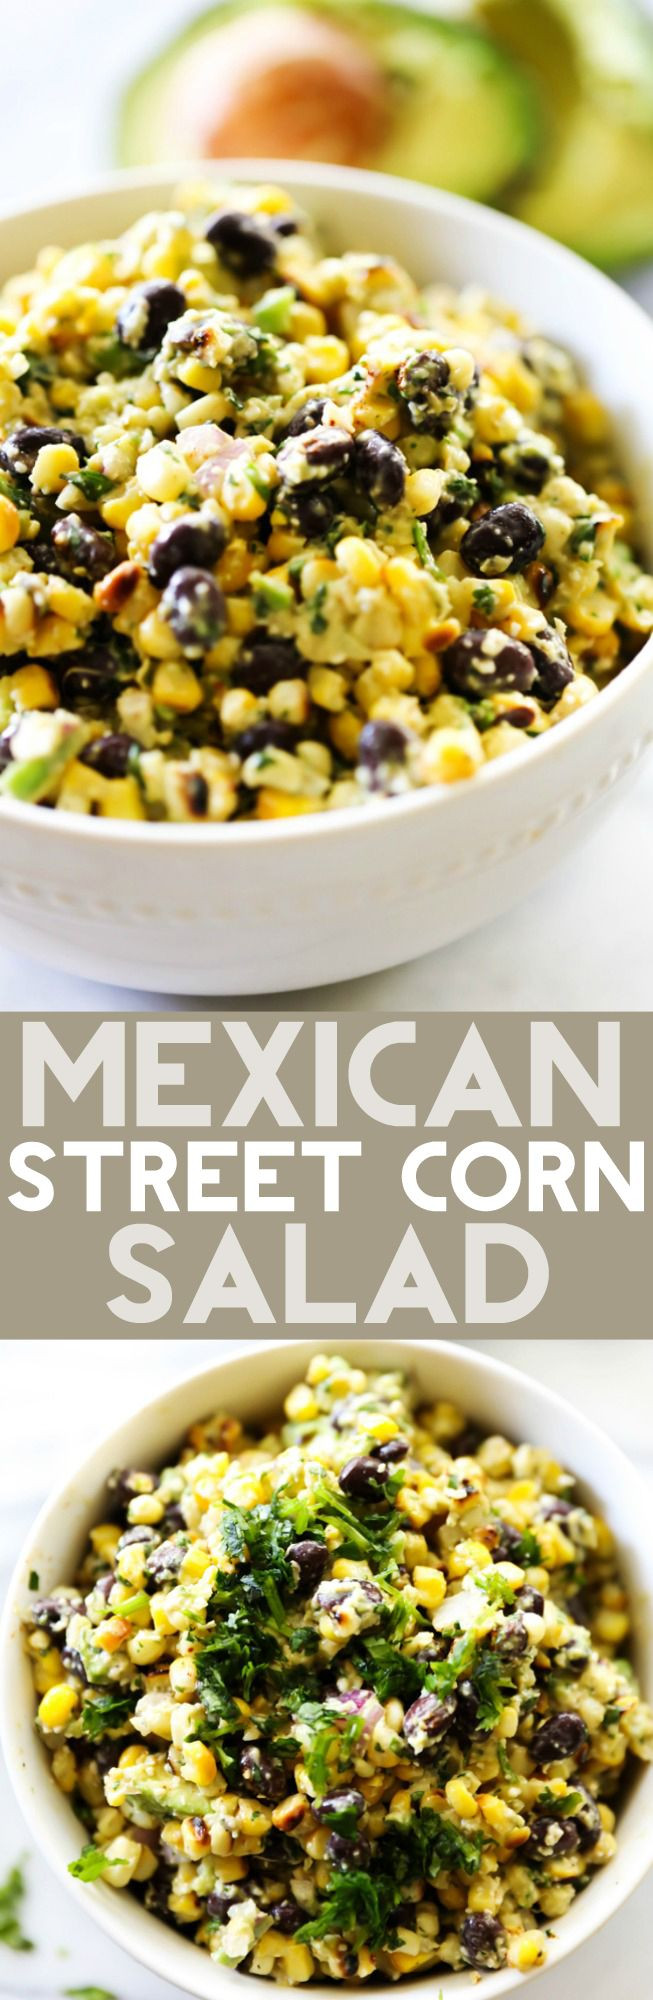 Healthy Mexican Side Dishes
 The 25 best Mexican side dishes ideas on Pinterest